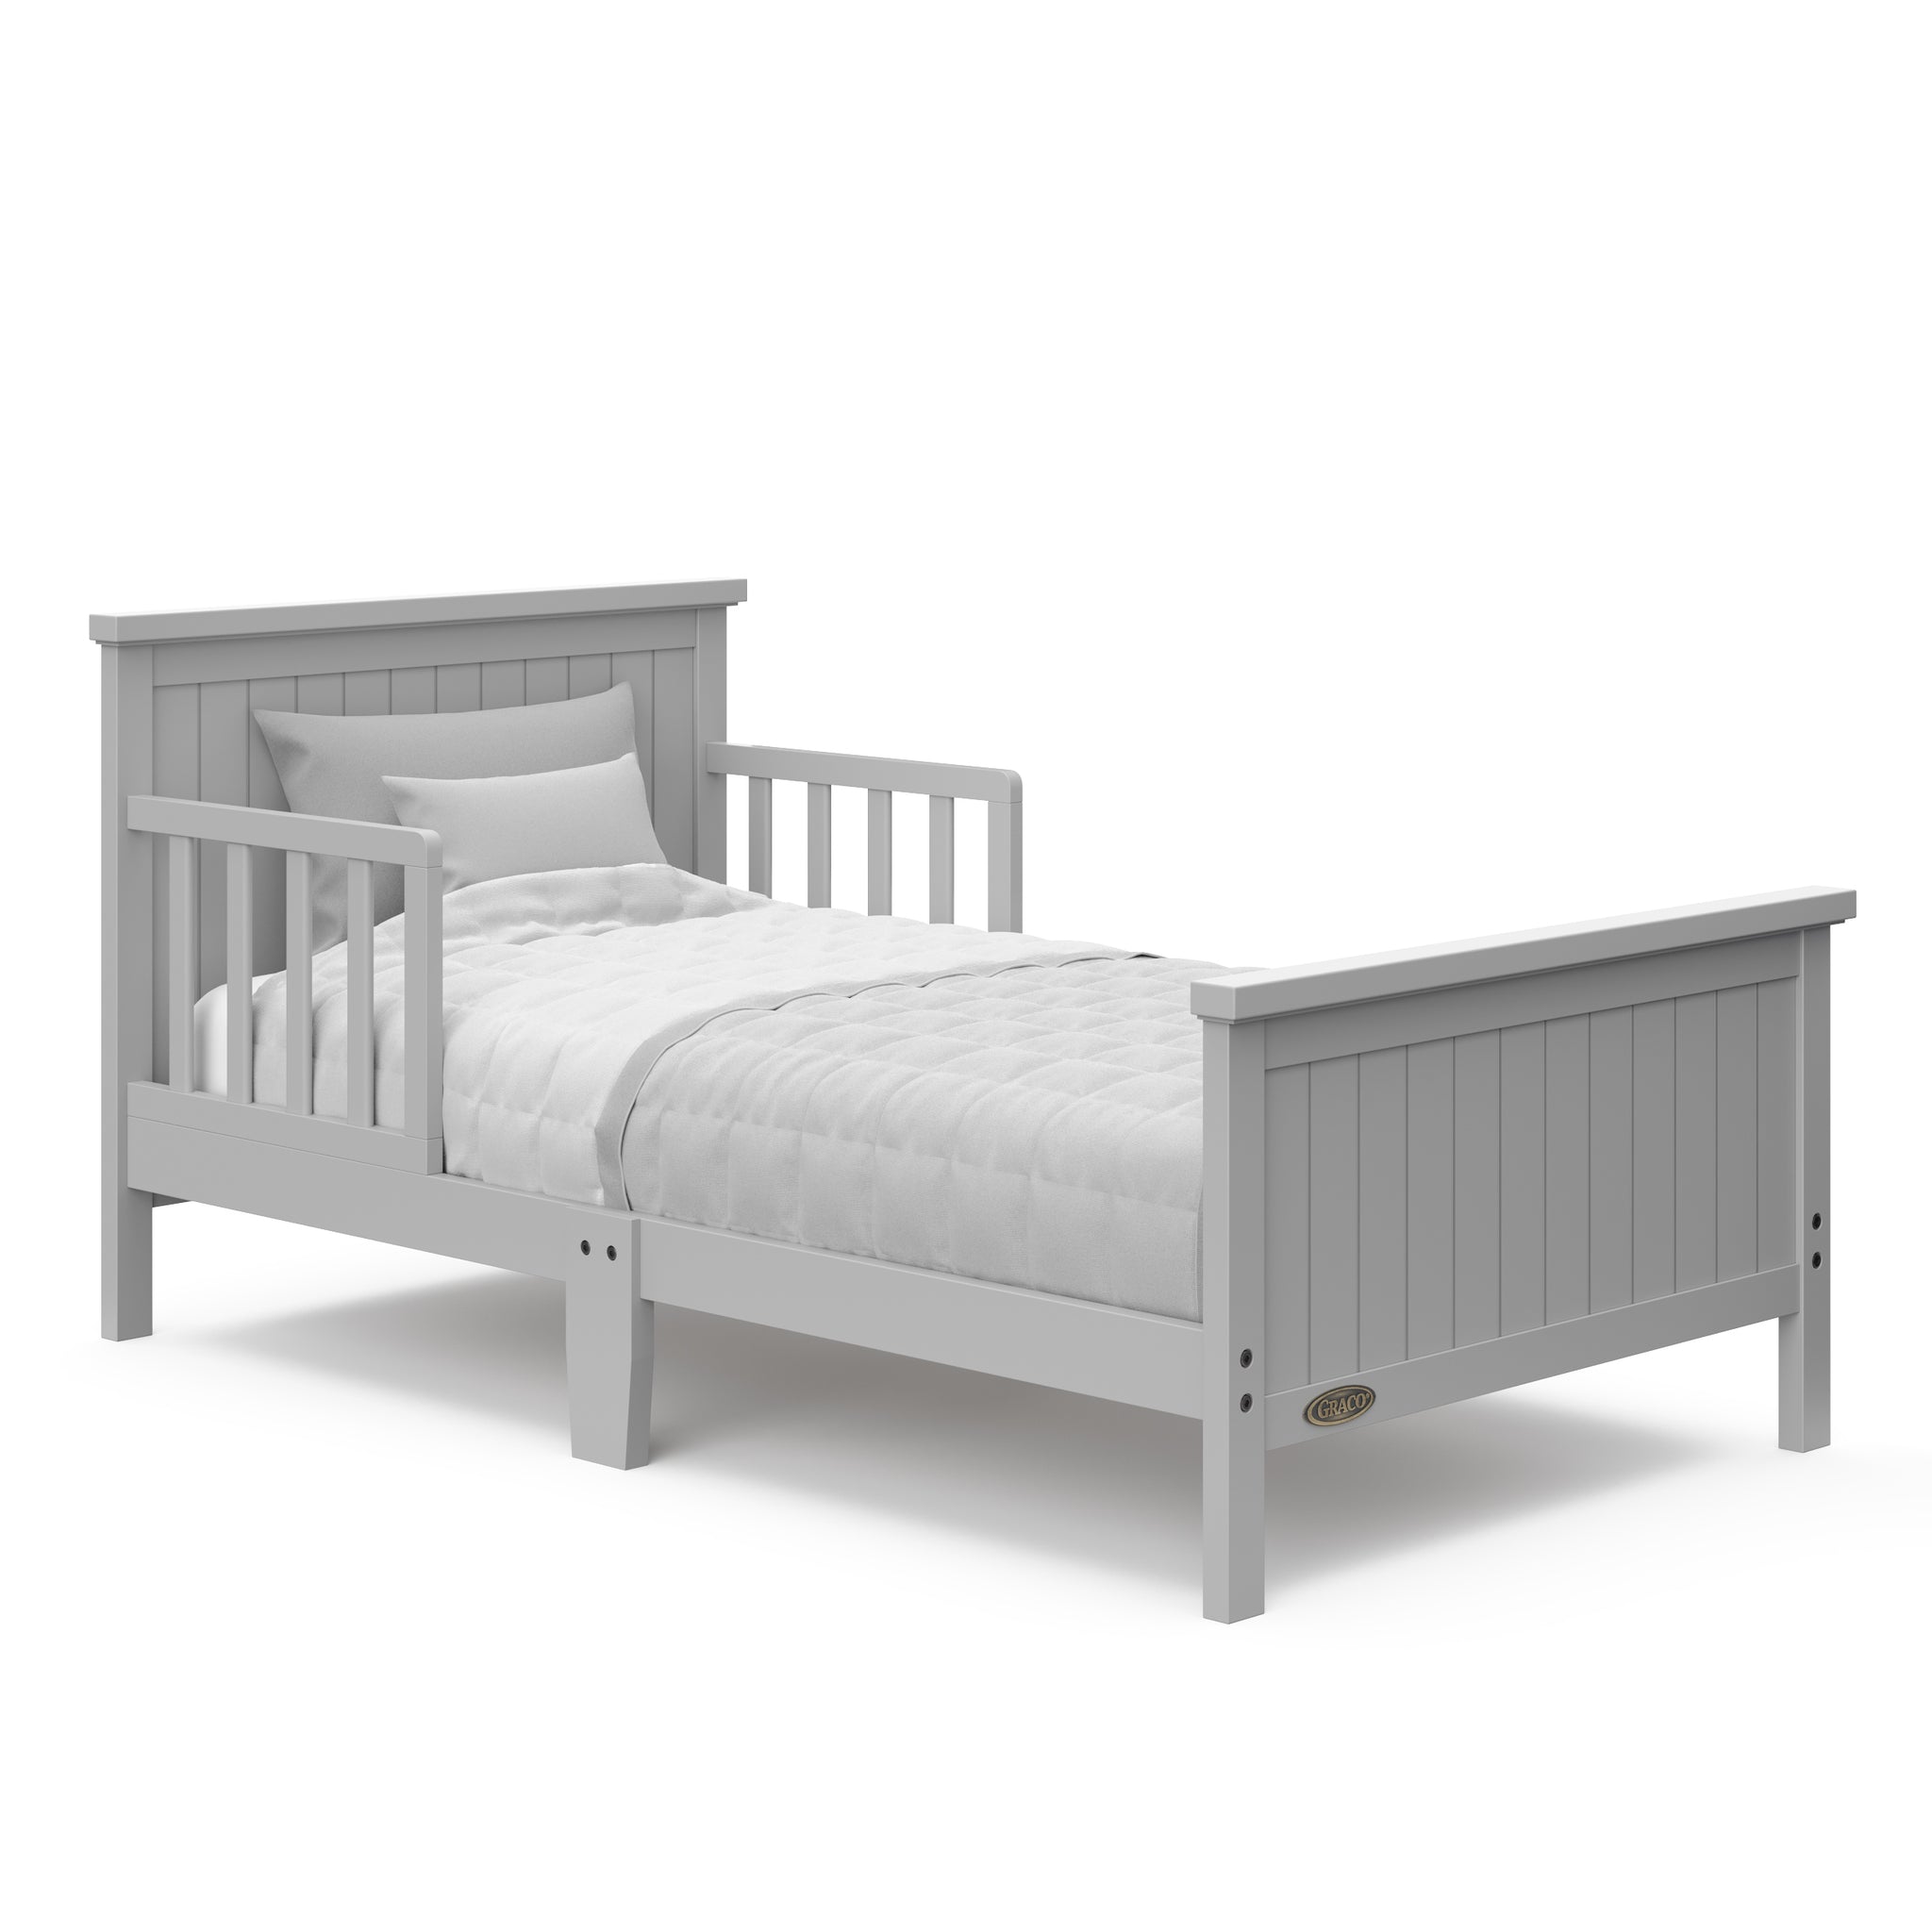 Pebble gray toddler bed with guardrails angled with bedding